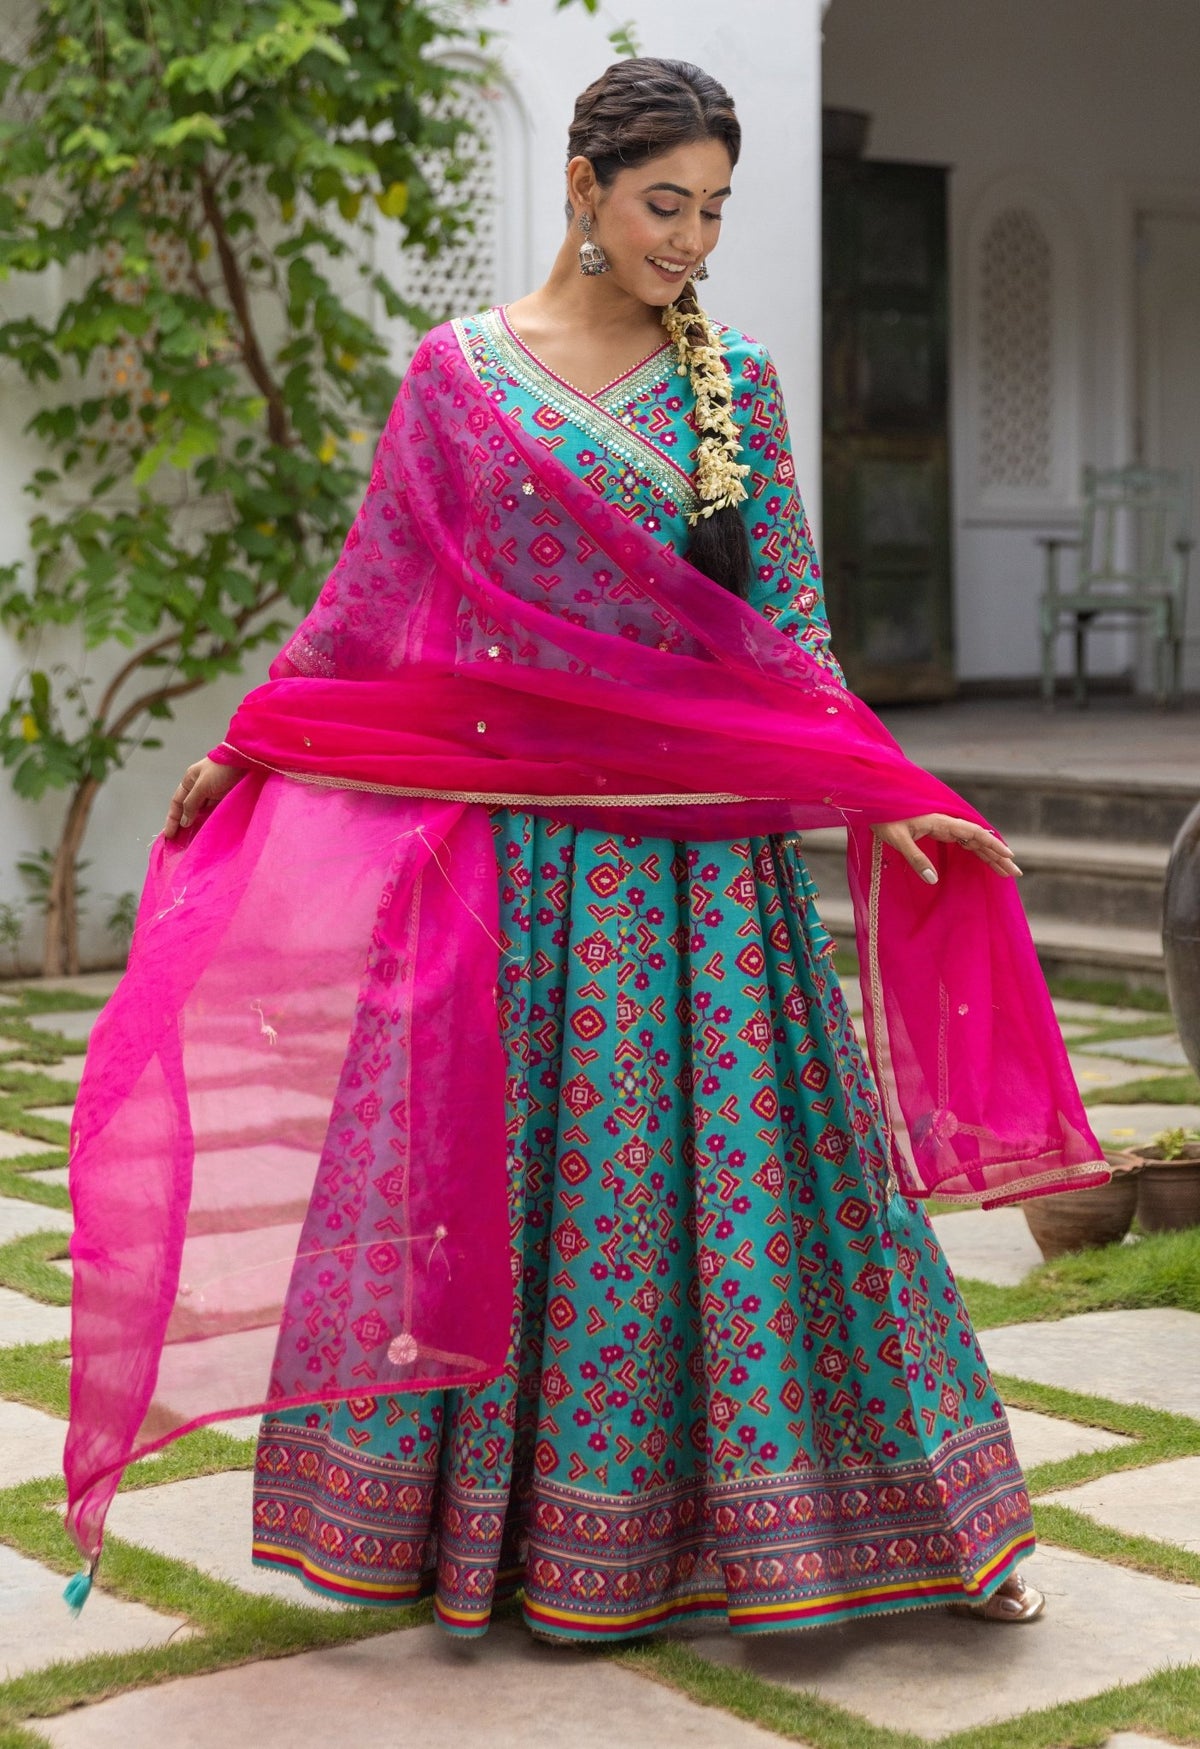 Shop Indian Ethnic Wear For Women Online | Indian outfits, Kurta designs,  Indian dresses